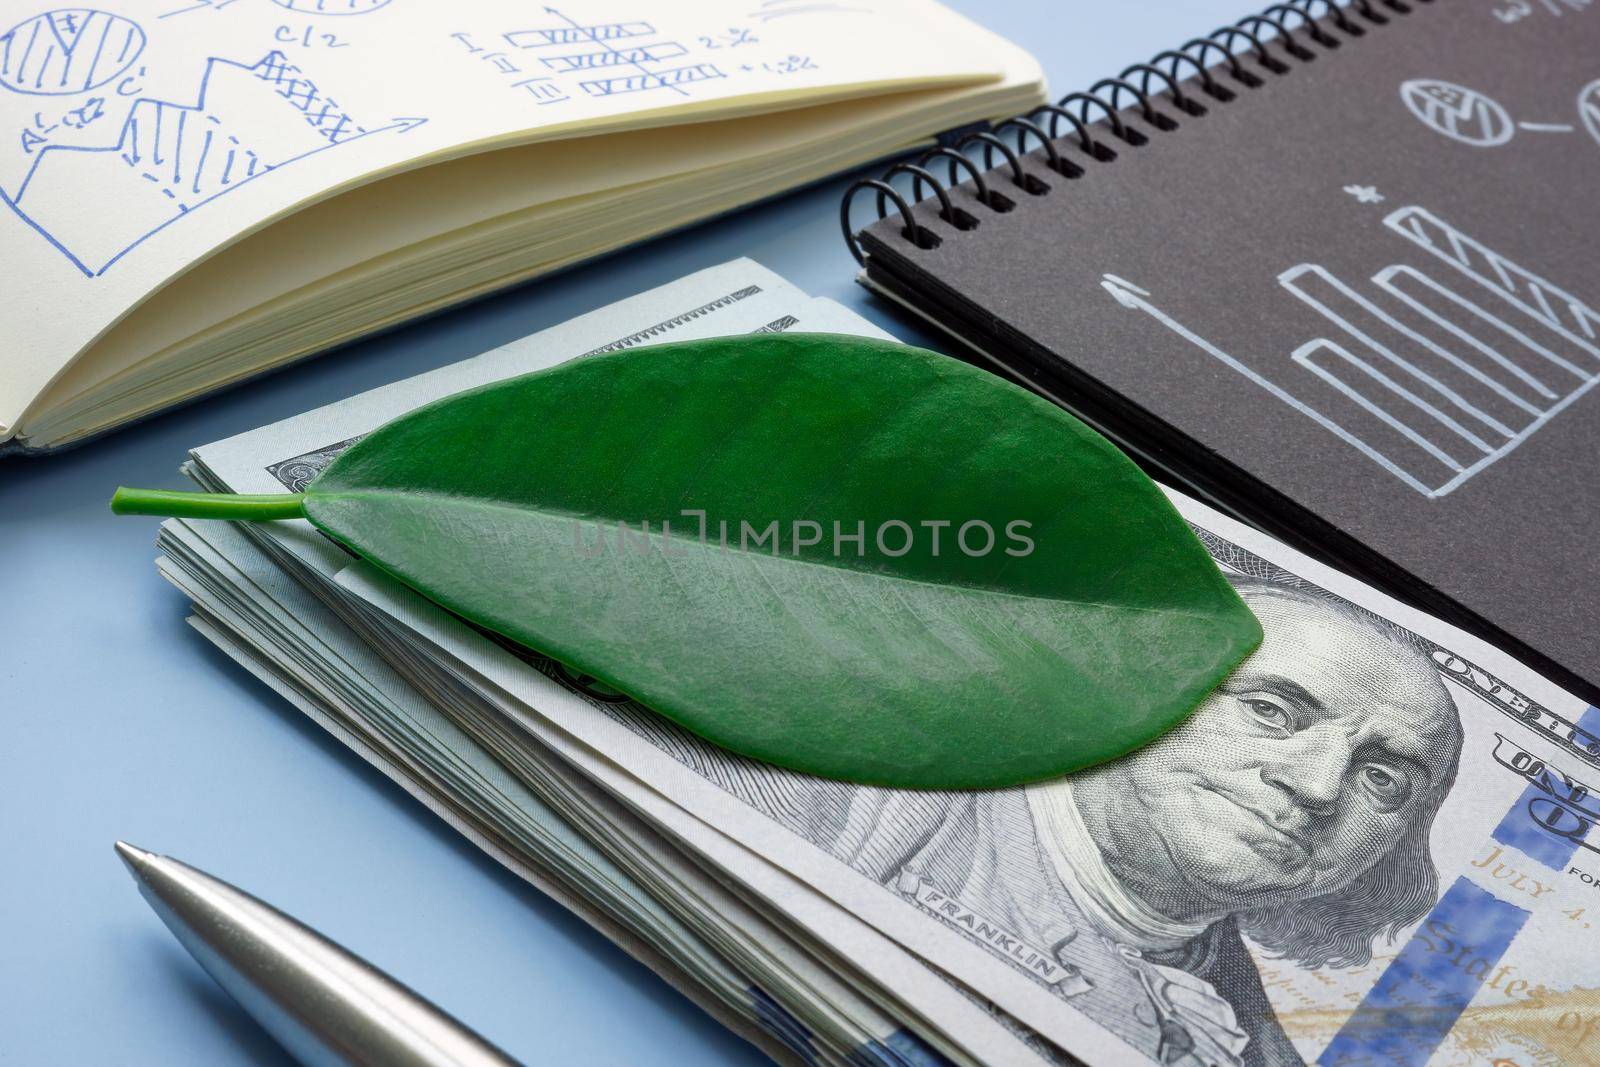 A green leaf on bundle of money as a symbol of impact investment.